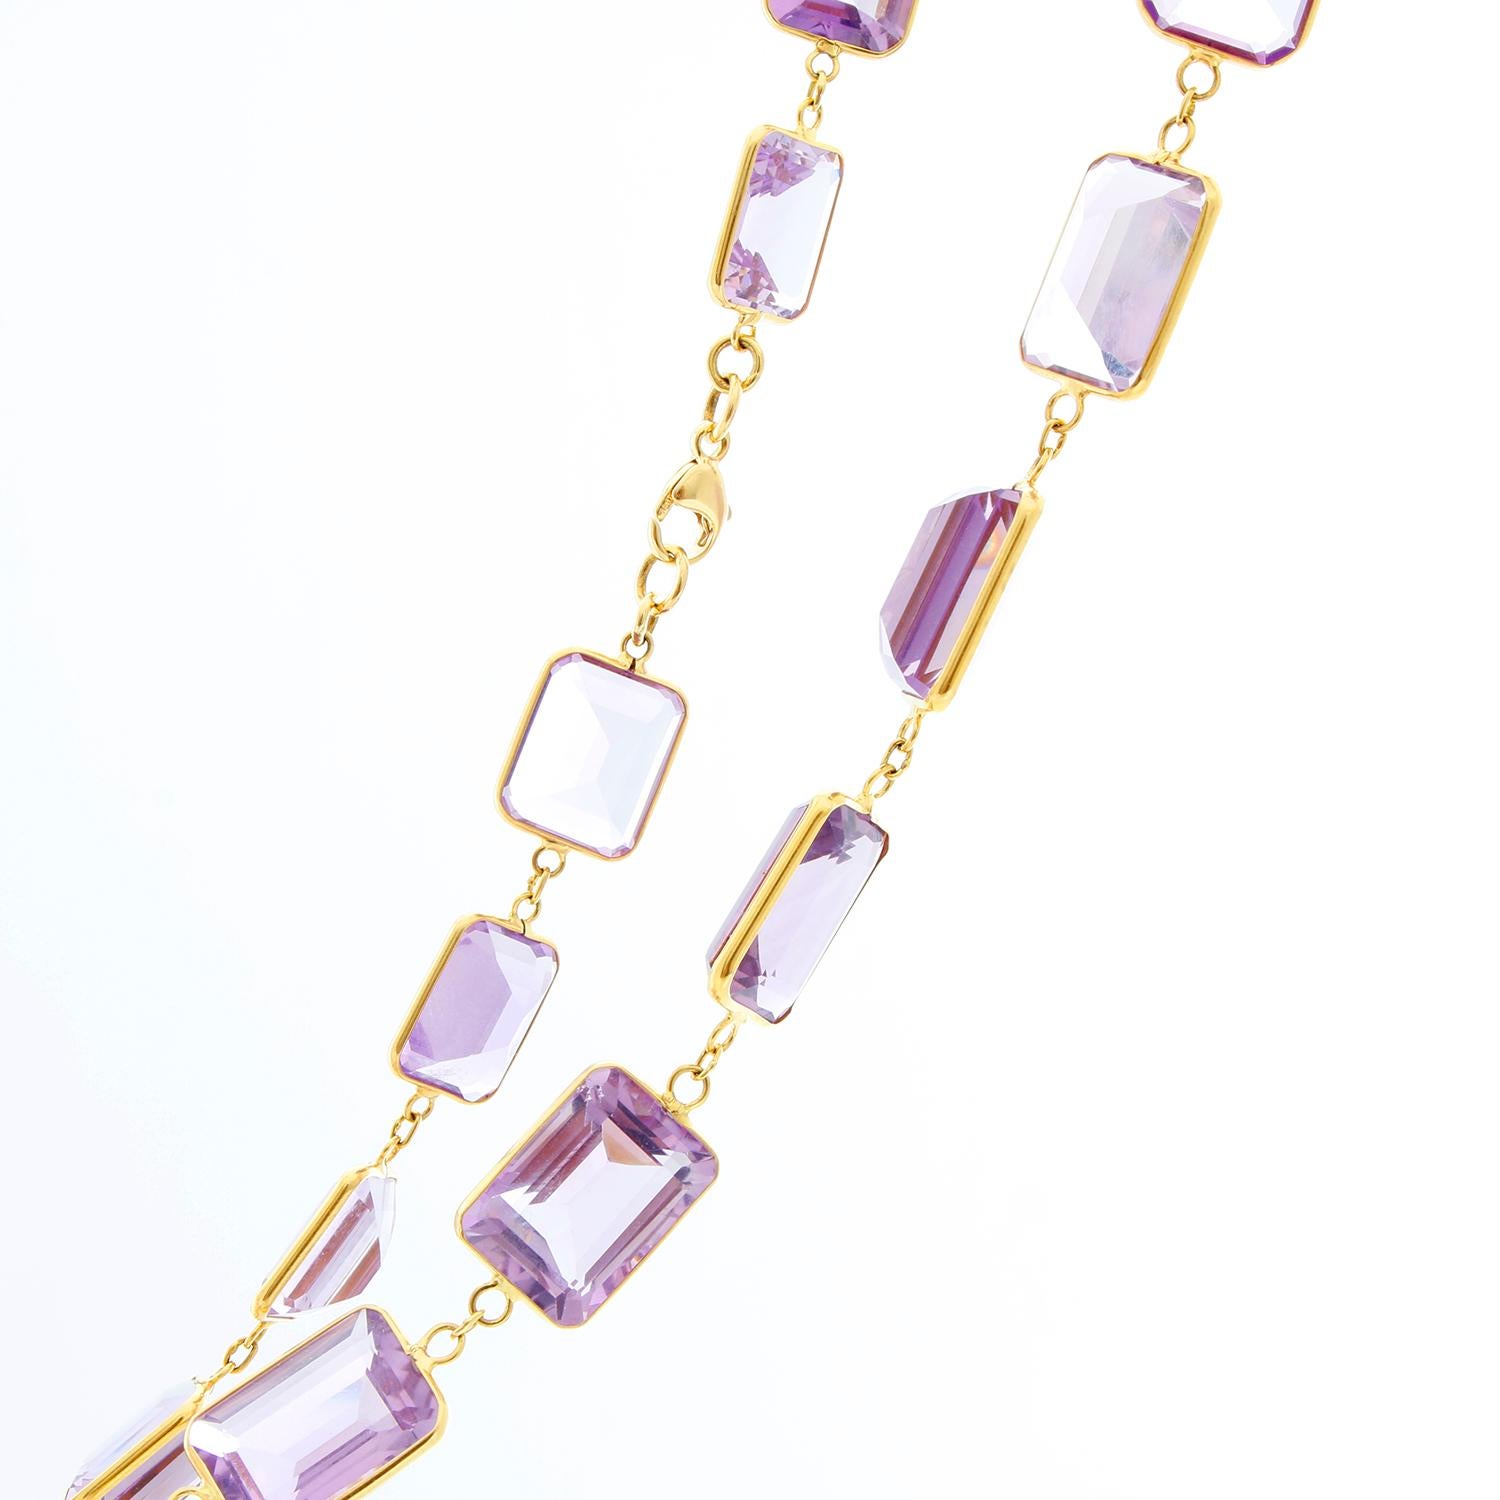 Light Purple Amethyst Necklace  - Dazzle in this light purple amethyst necklace that measures 18 inches long and has 40 stones. Holding everything together is 18k yellow gold. Approx 283 total ct weight. This necklace is unworn comes with a DeMesy